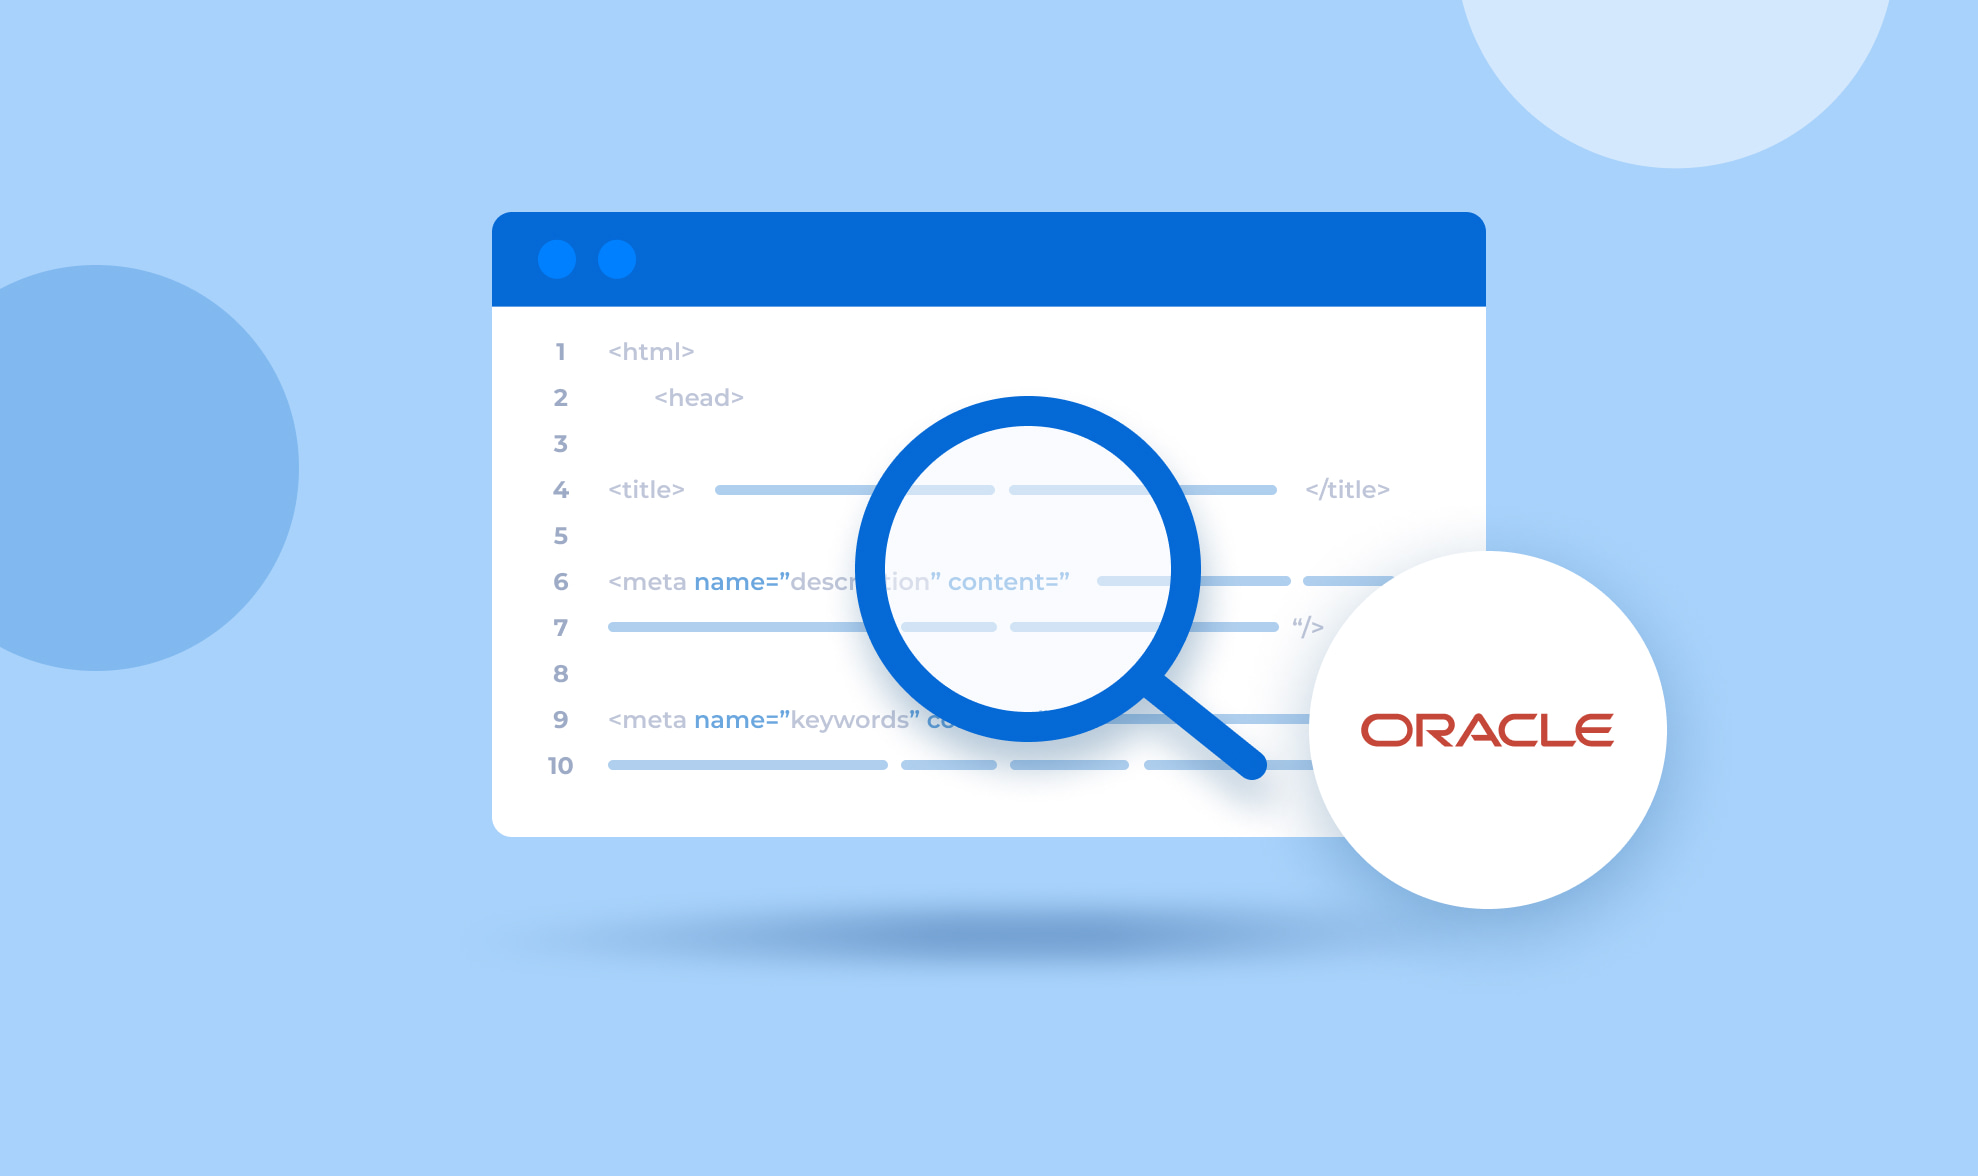 A misconfigured service can play a crucial role in facilitating a Server Side Request Forgery (SSRF) attack. Oracle SSRF metadata can help predict it.